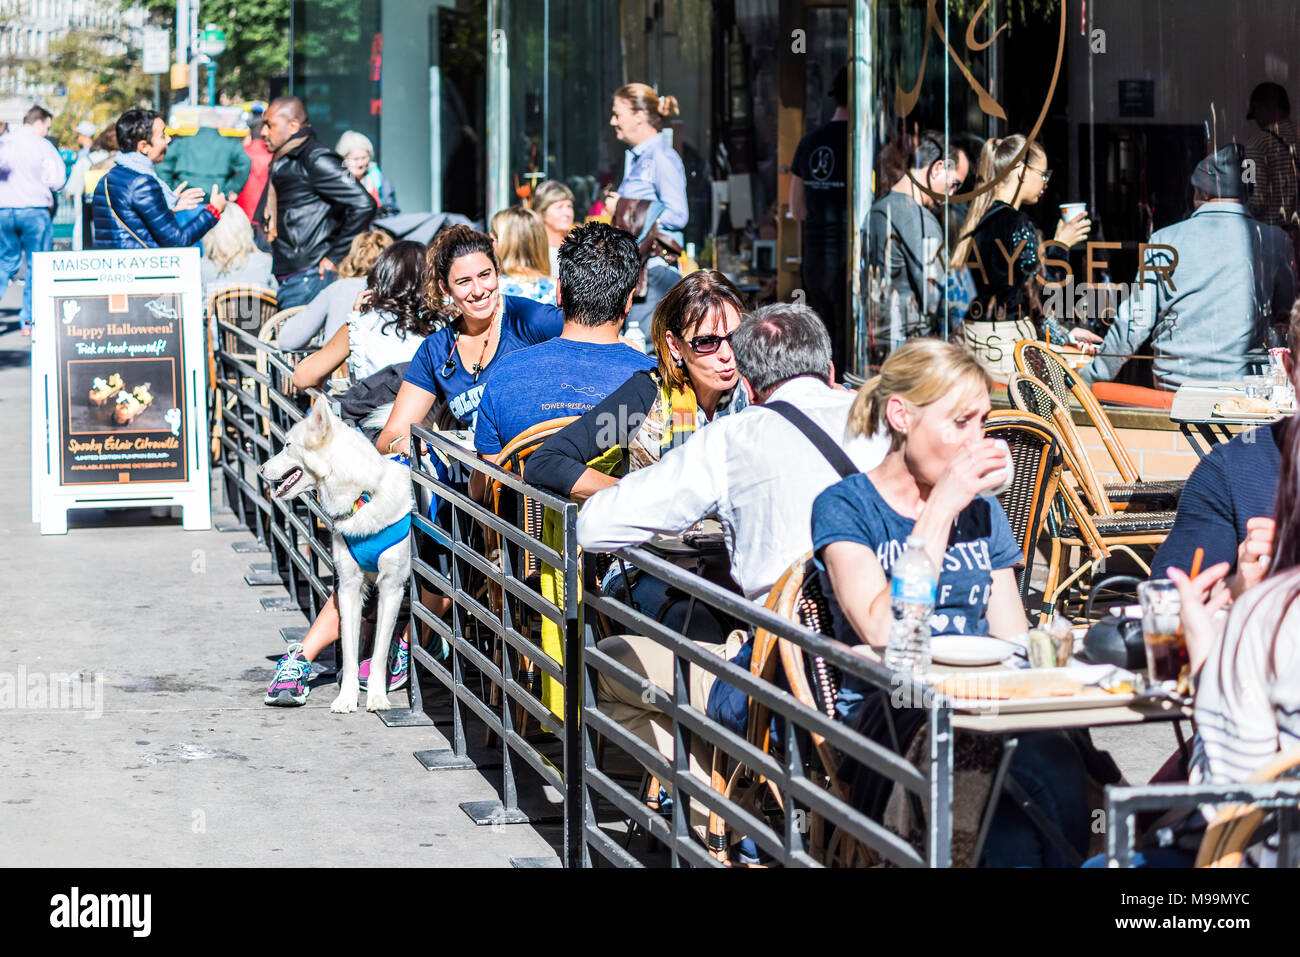 New York City, USA - October 28, 2017: Crowded restaurant outside on street with many people sitting outdoors, happy, smiling on sunny day in Midtown  Stock Photo